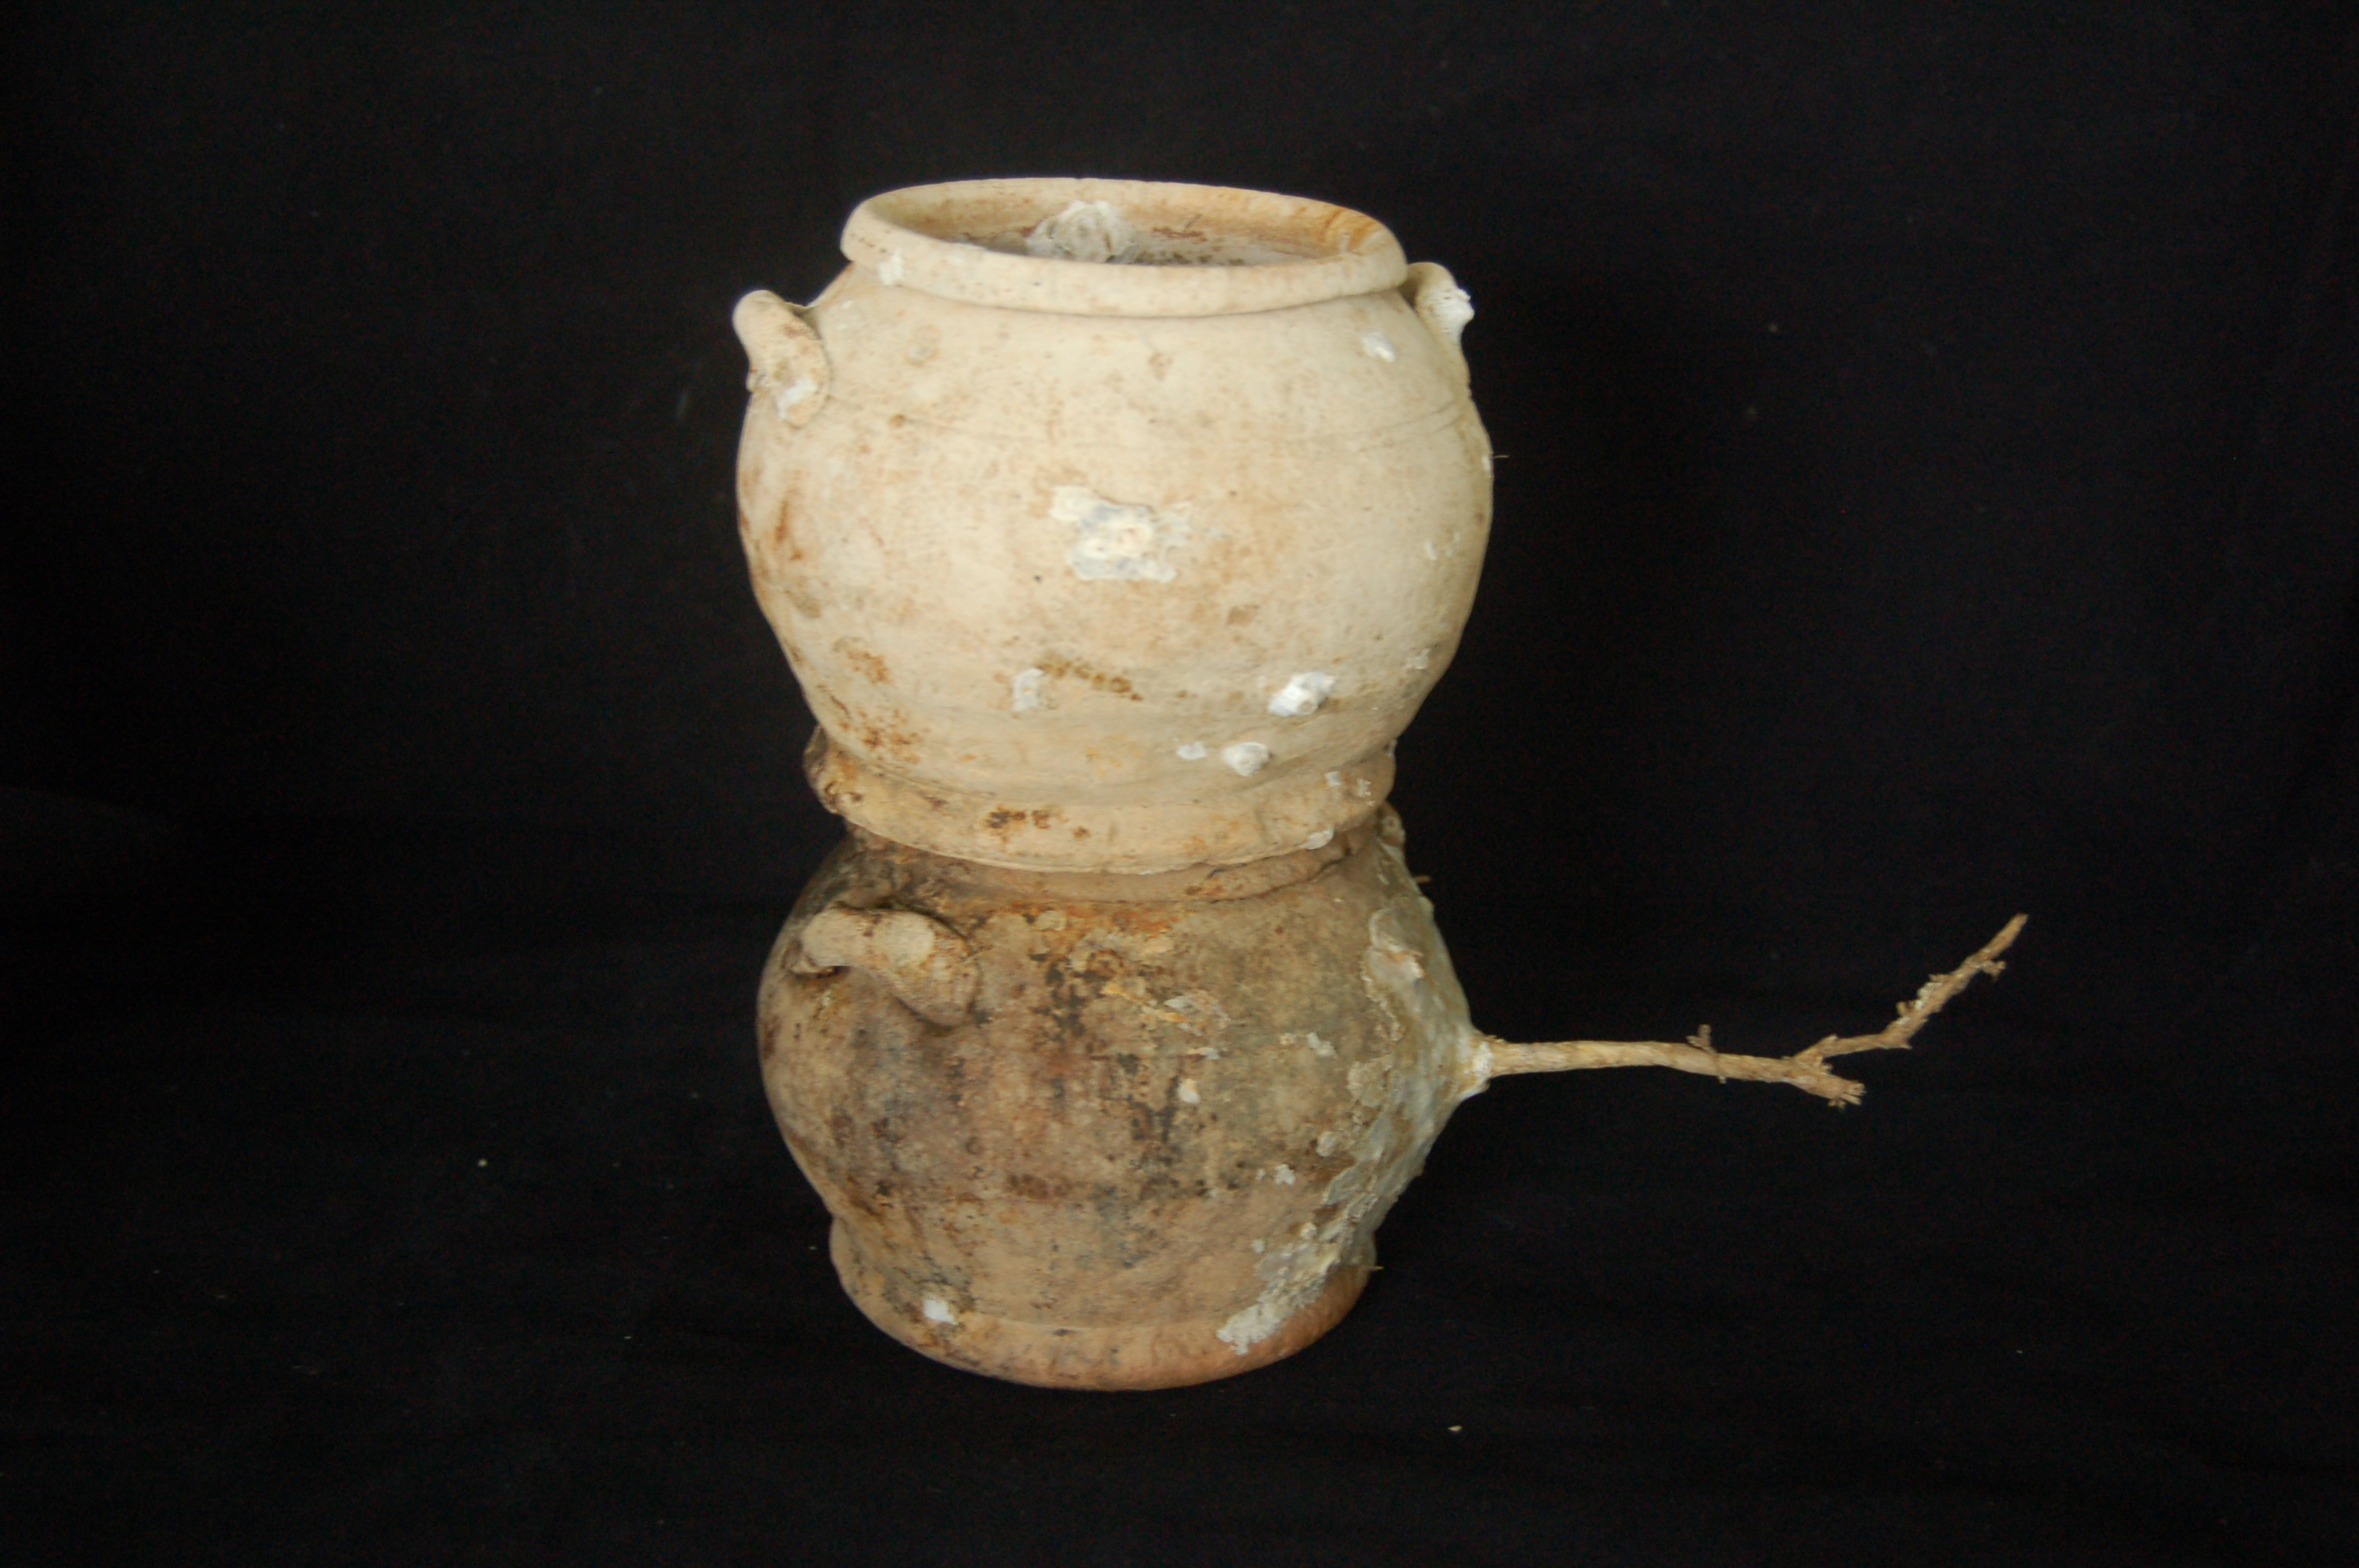 Small squat wide-mouth jars stuck together, each with two lug-handles on the shoulder, a folded mouth-rim and a flat base. Diameter 11 cm, height 8 cm each.